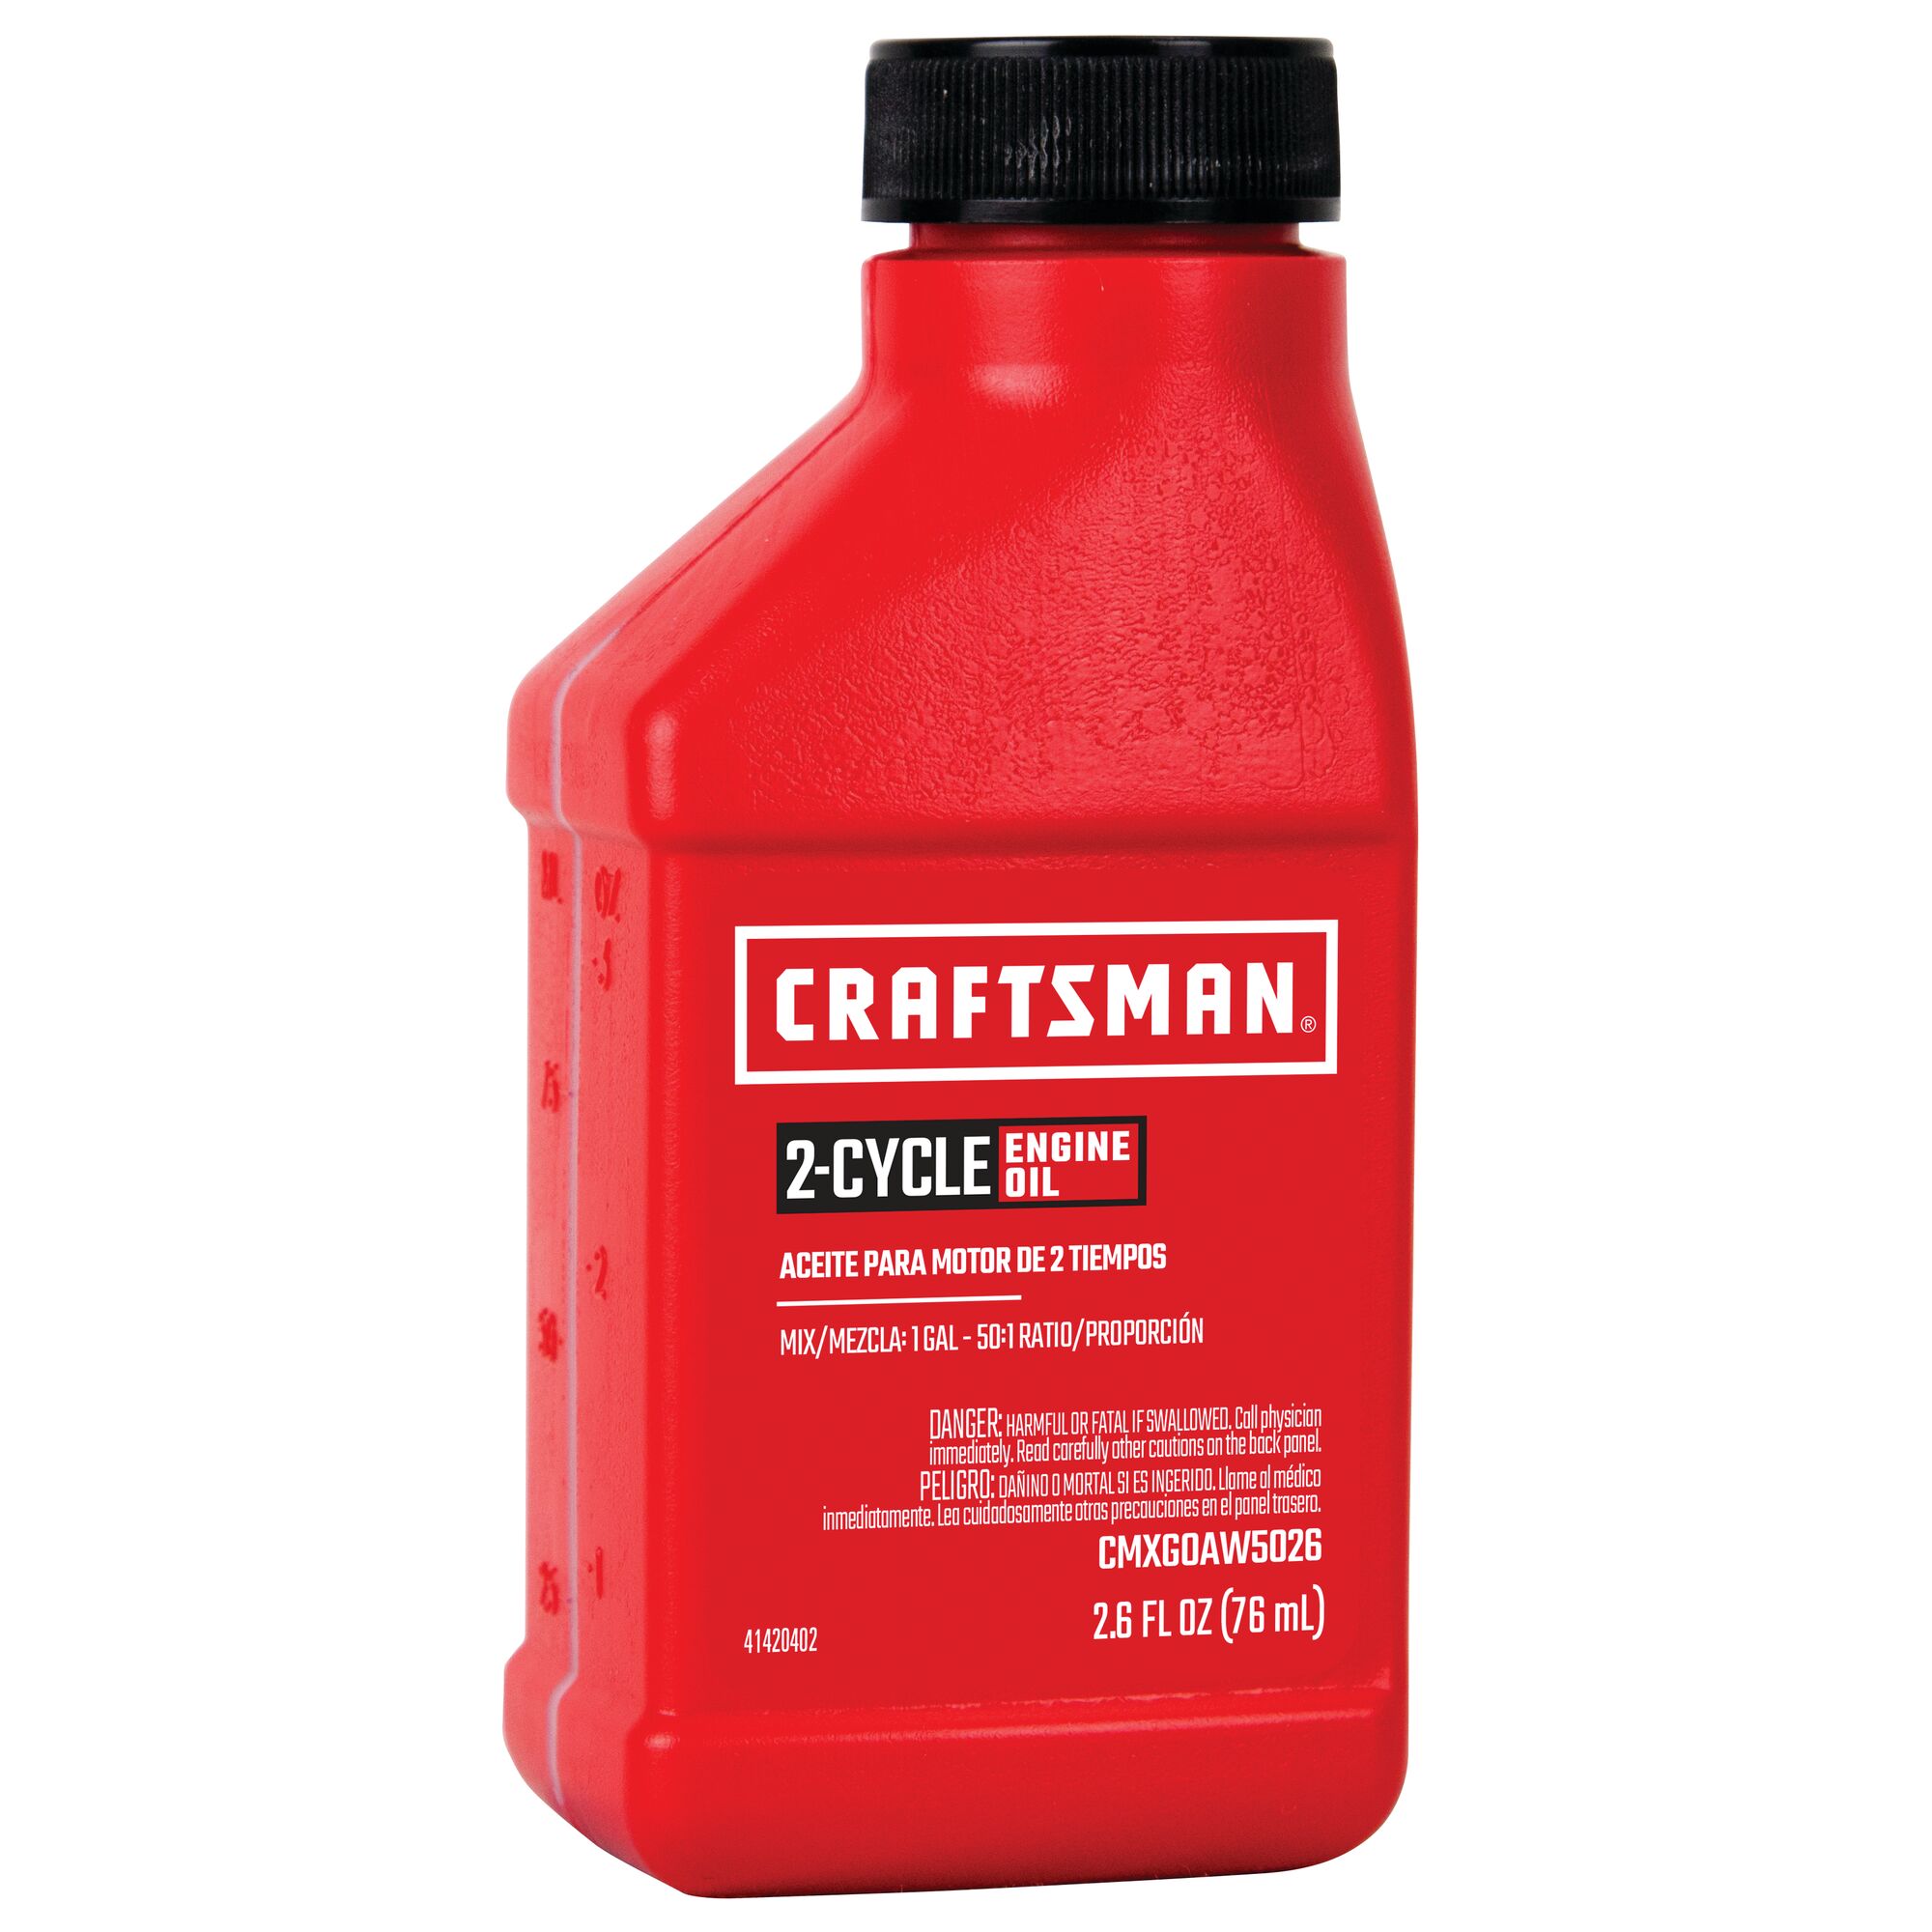 Craftsman 2 cycle 2.6 ounce engine oil.